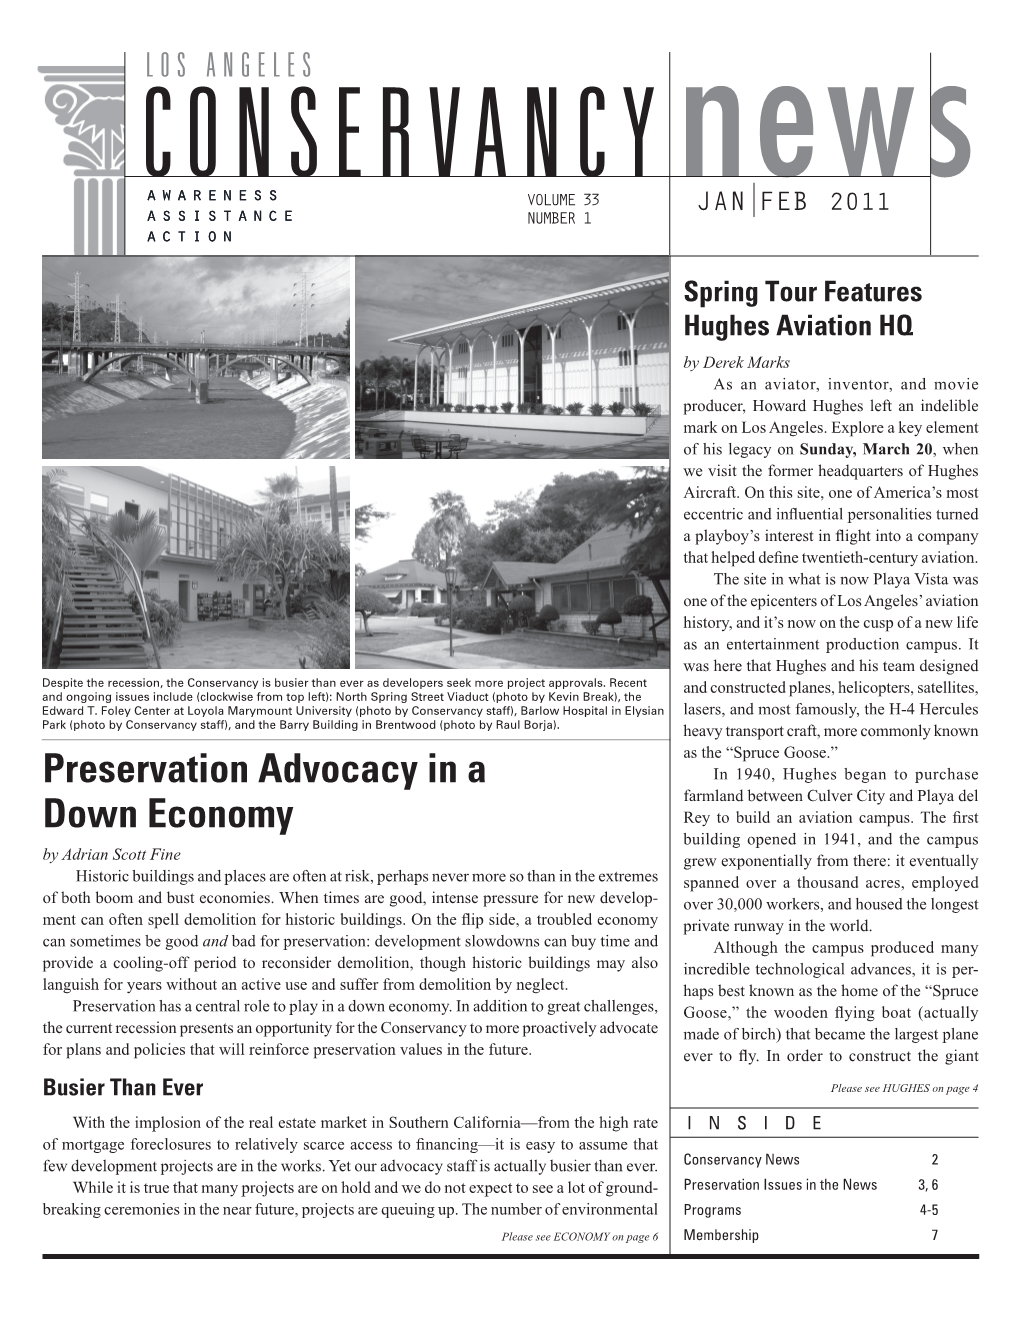 Preservation Advocacy in a Down Economy